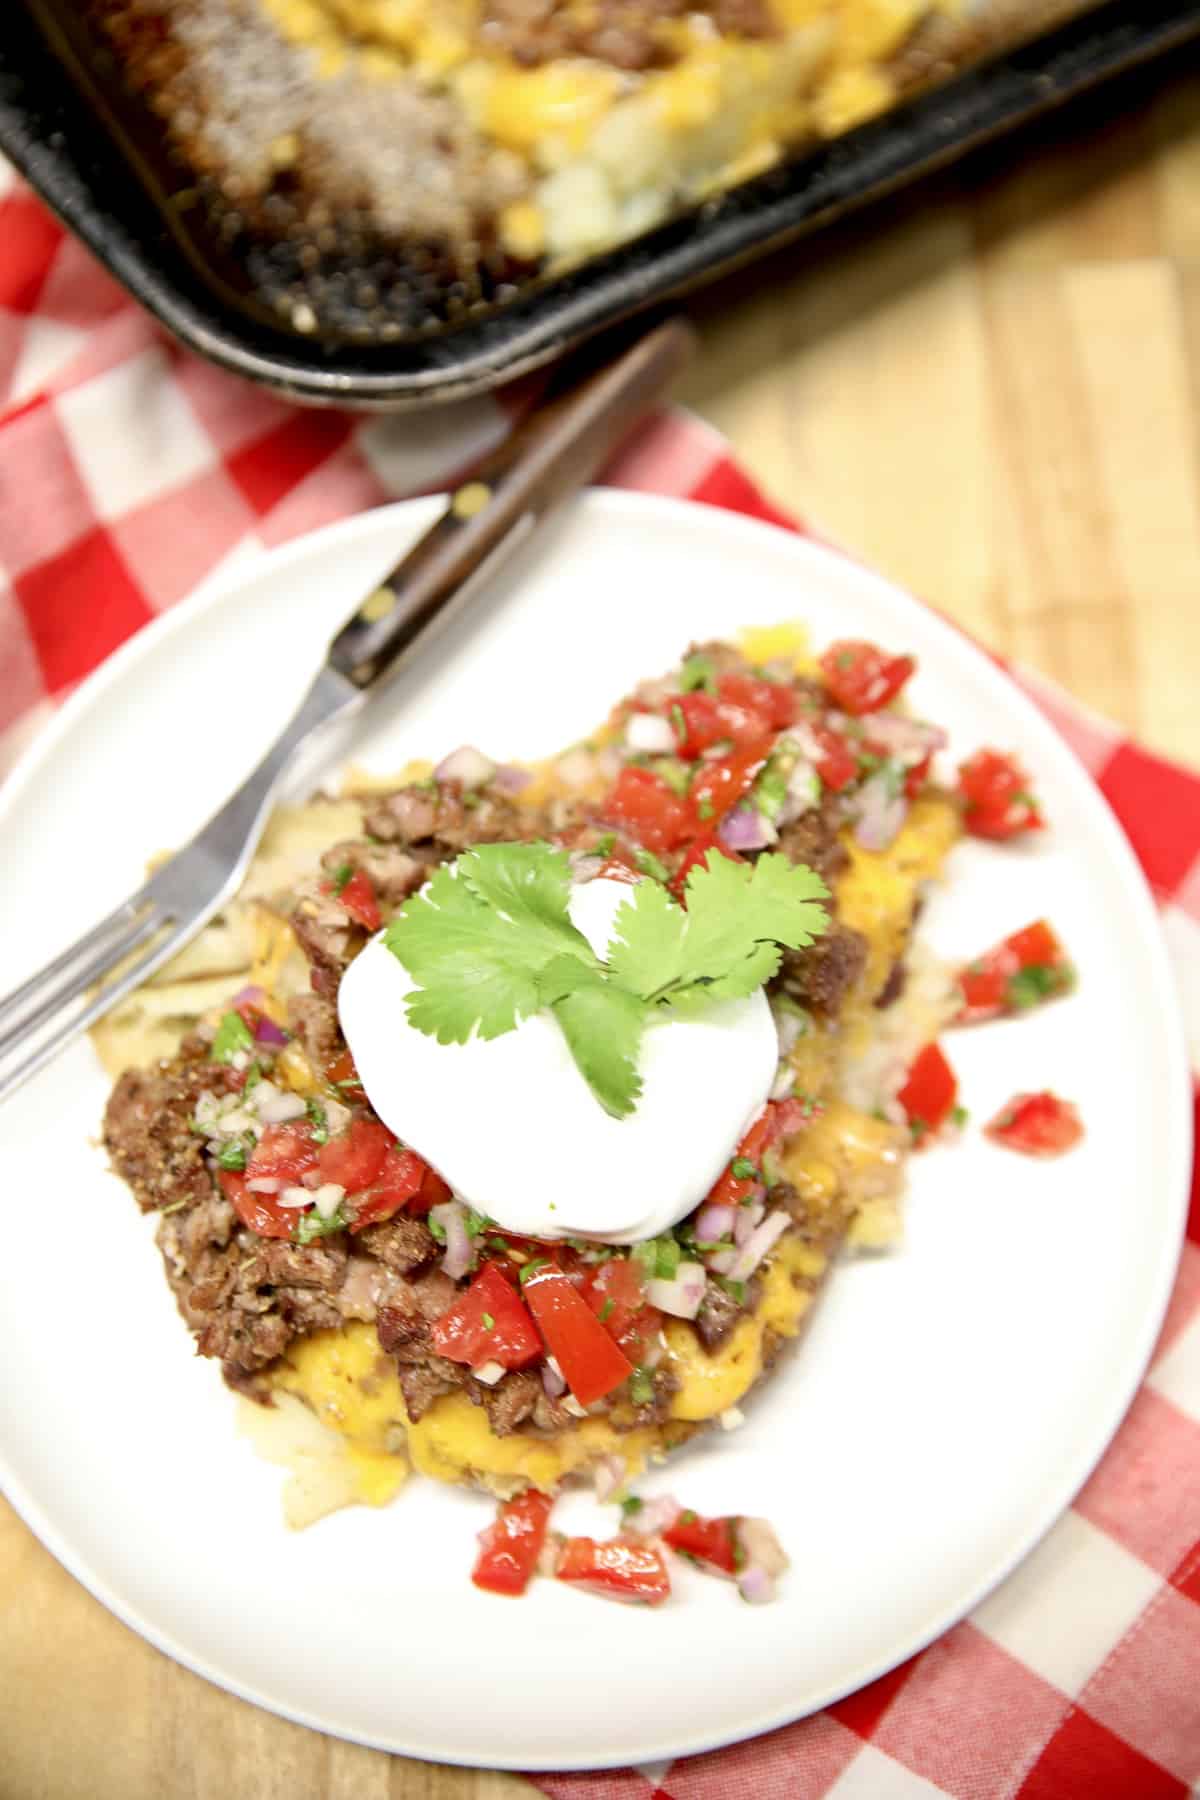 Loaded smashed potatoes with beef, salsa and sour cream.